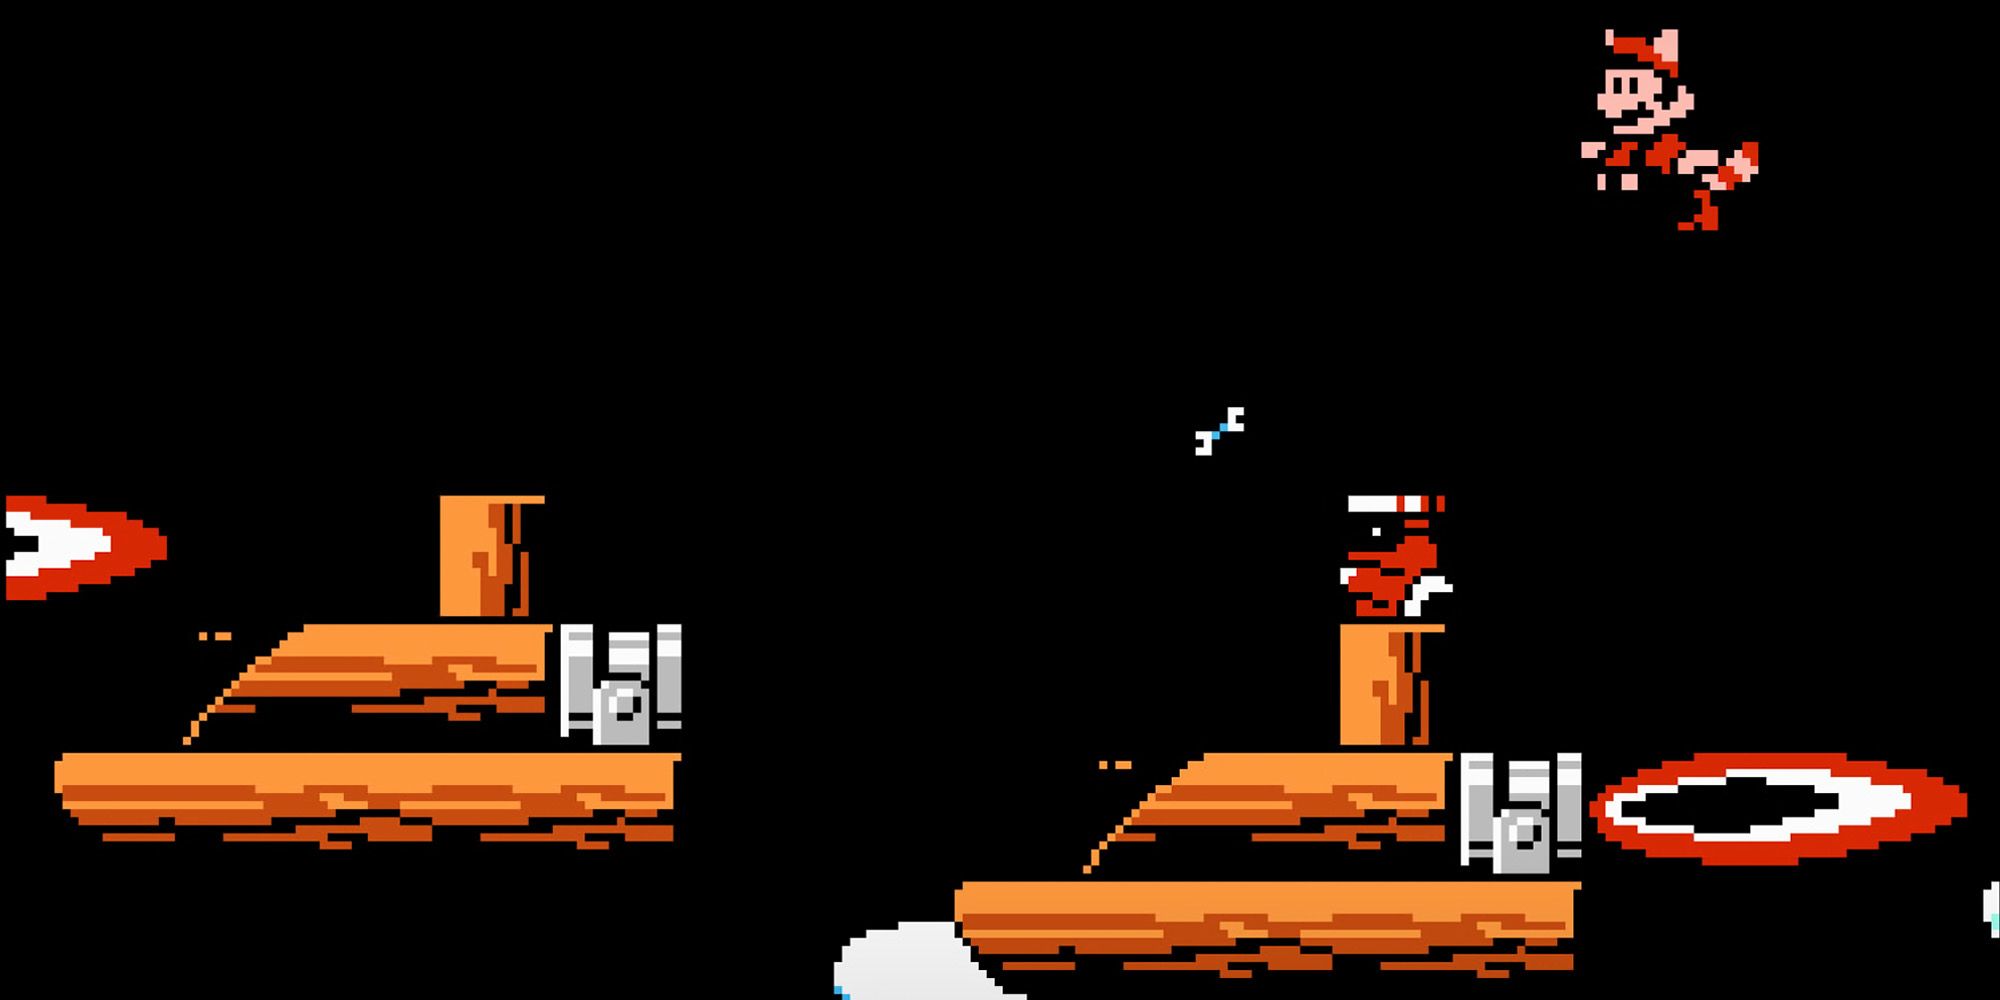 Super Mario Bros 3 - World 8 - Airship - Raccoon Mario Flying Past A Monty Mole And A Flamethrower